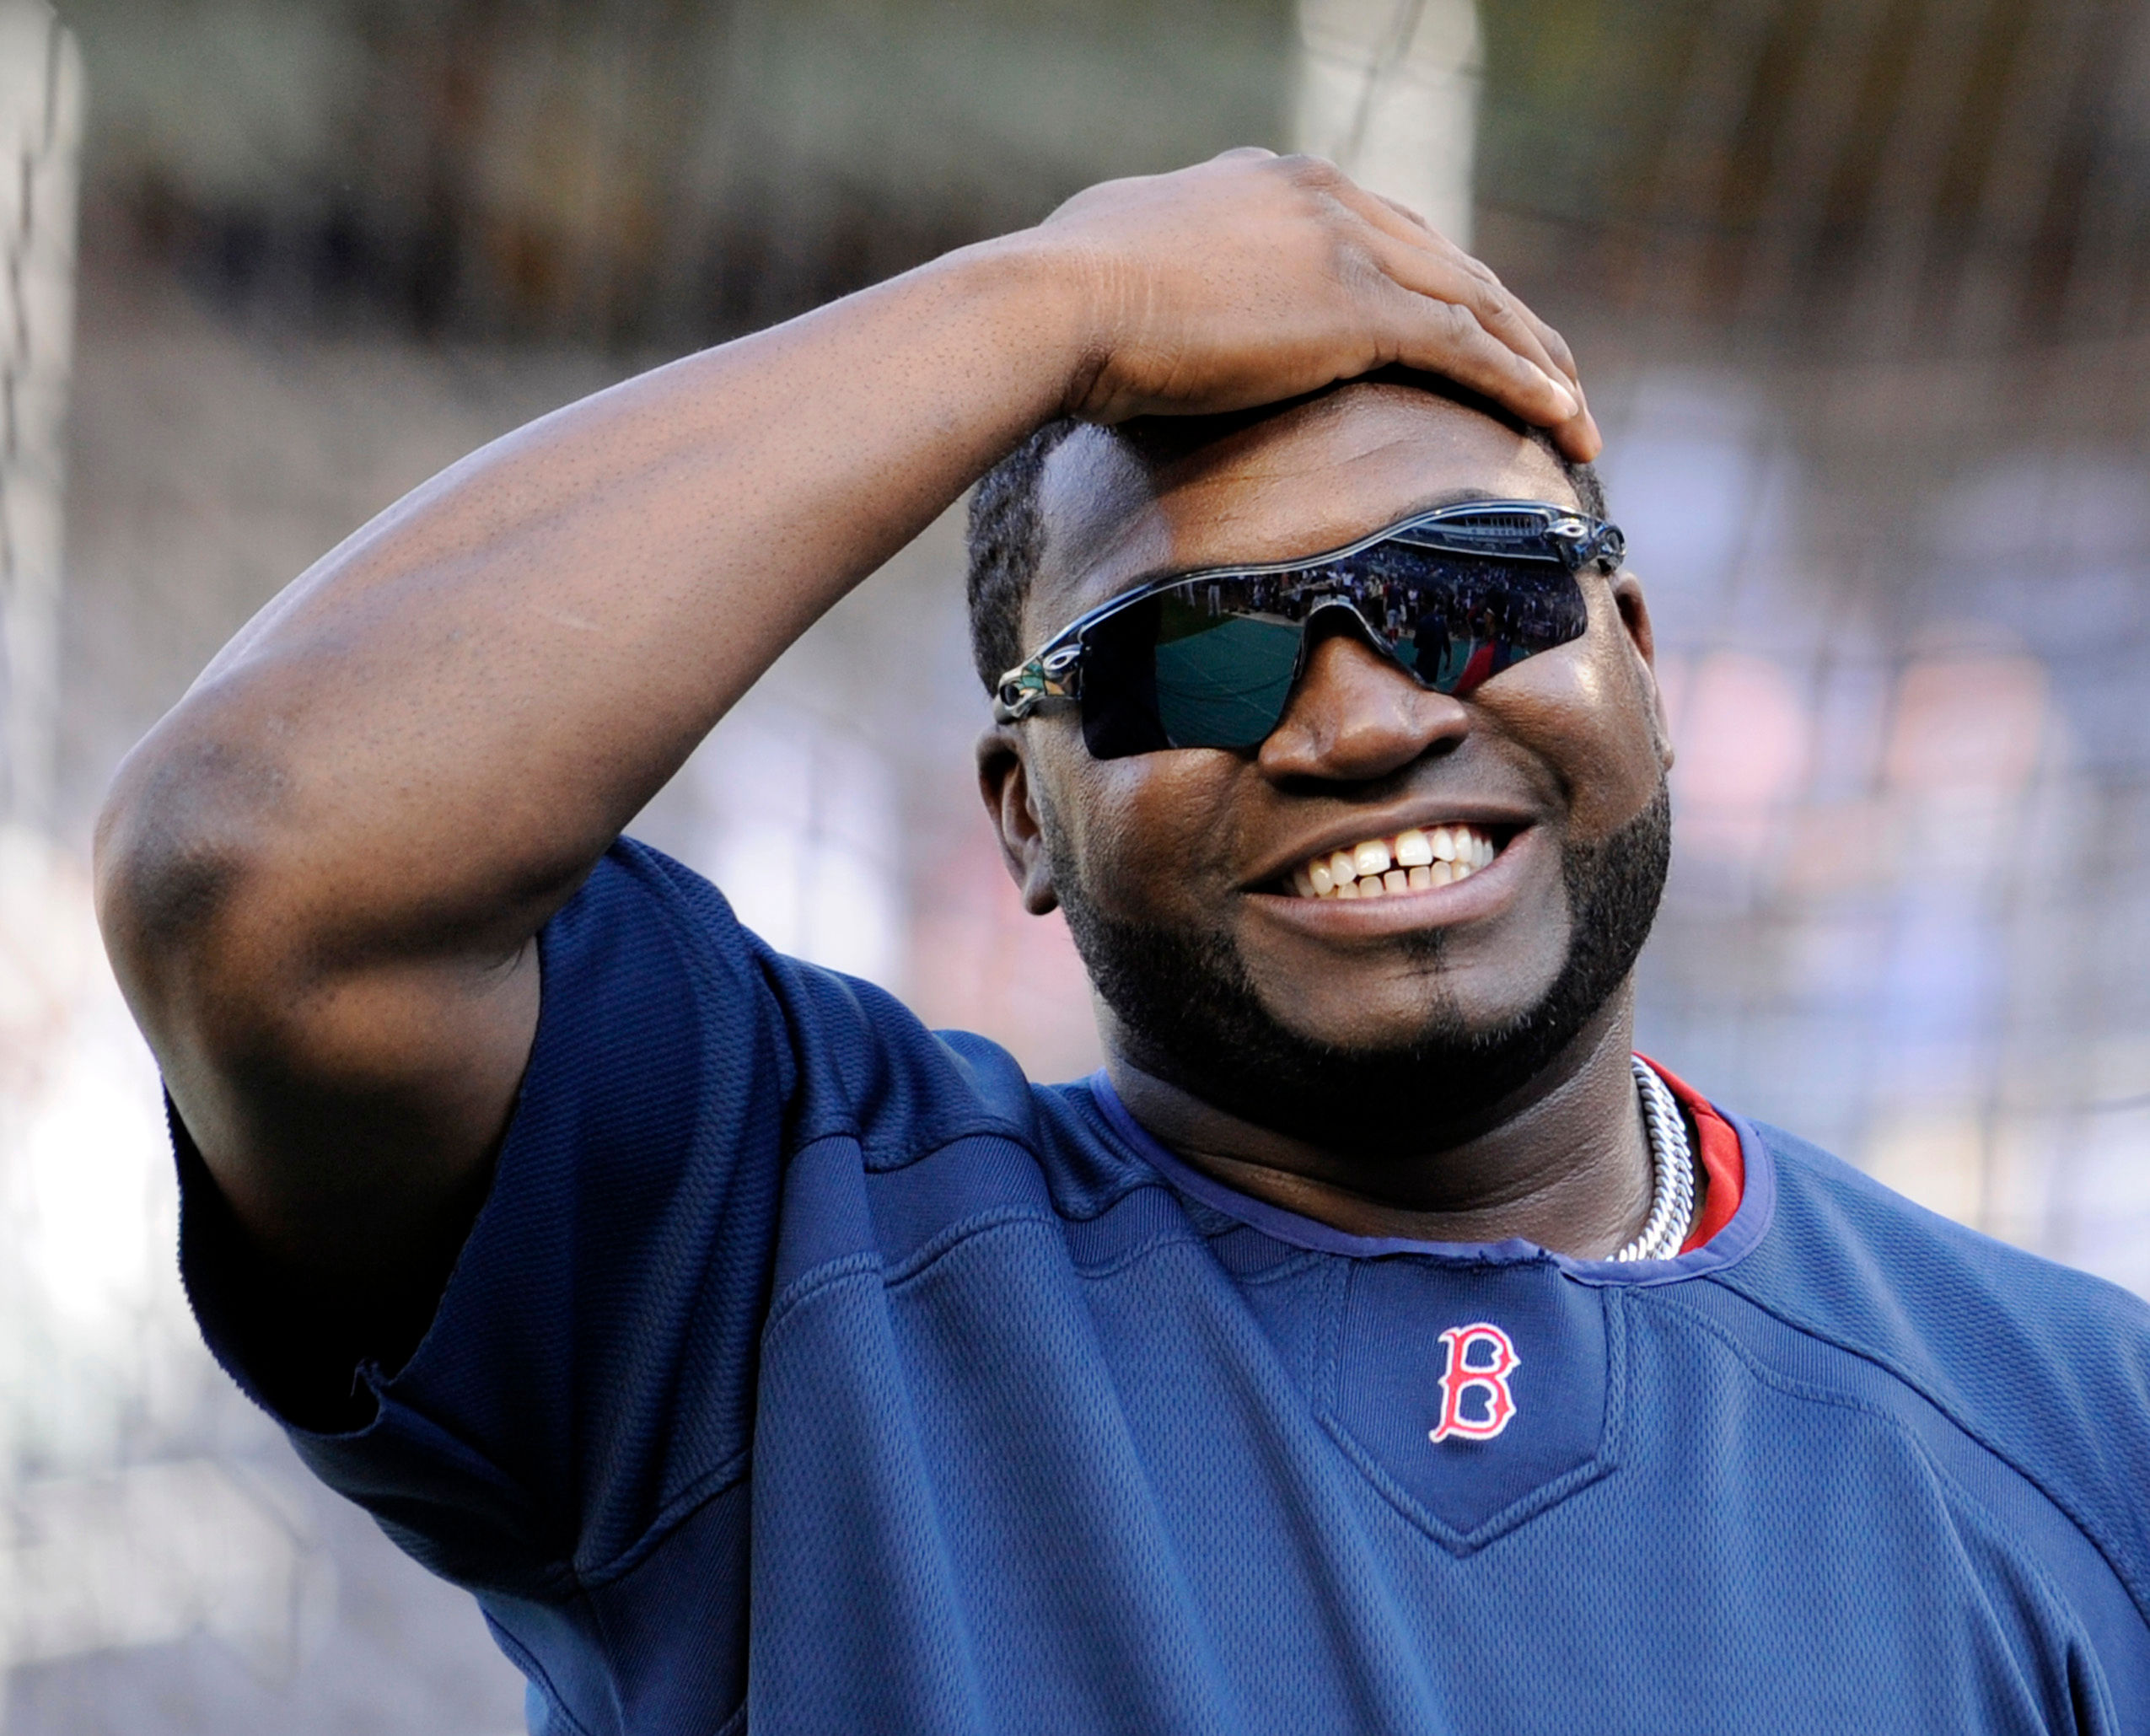 David Ortiz family: Know about Big Papi’s father Leo Ortiz, wife and children